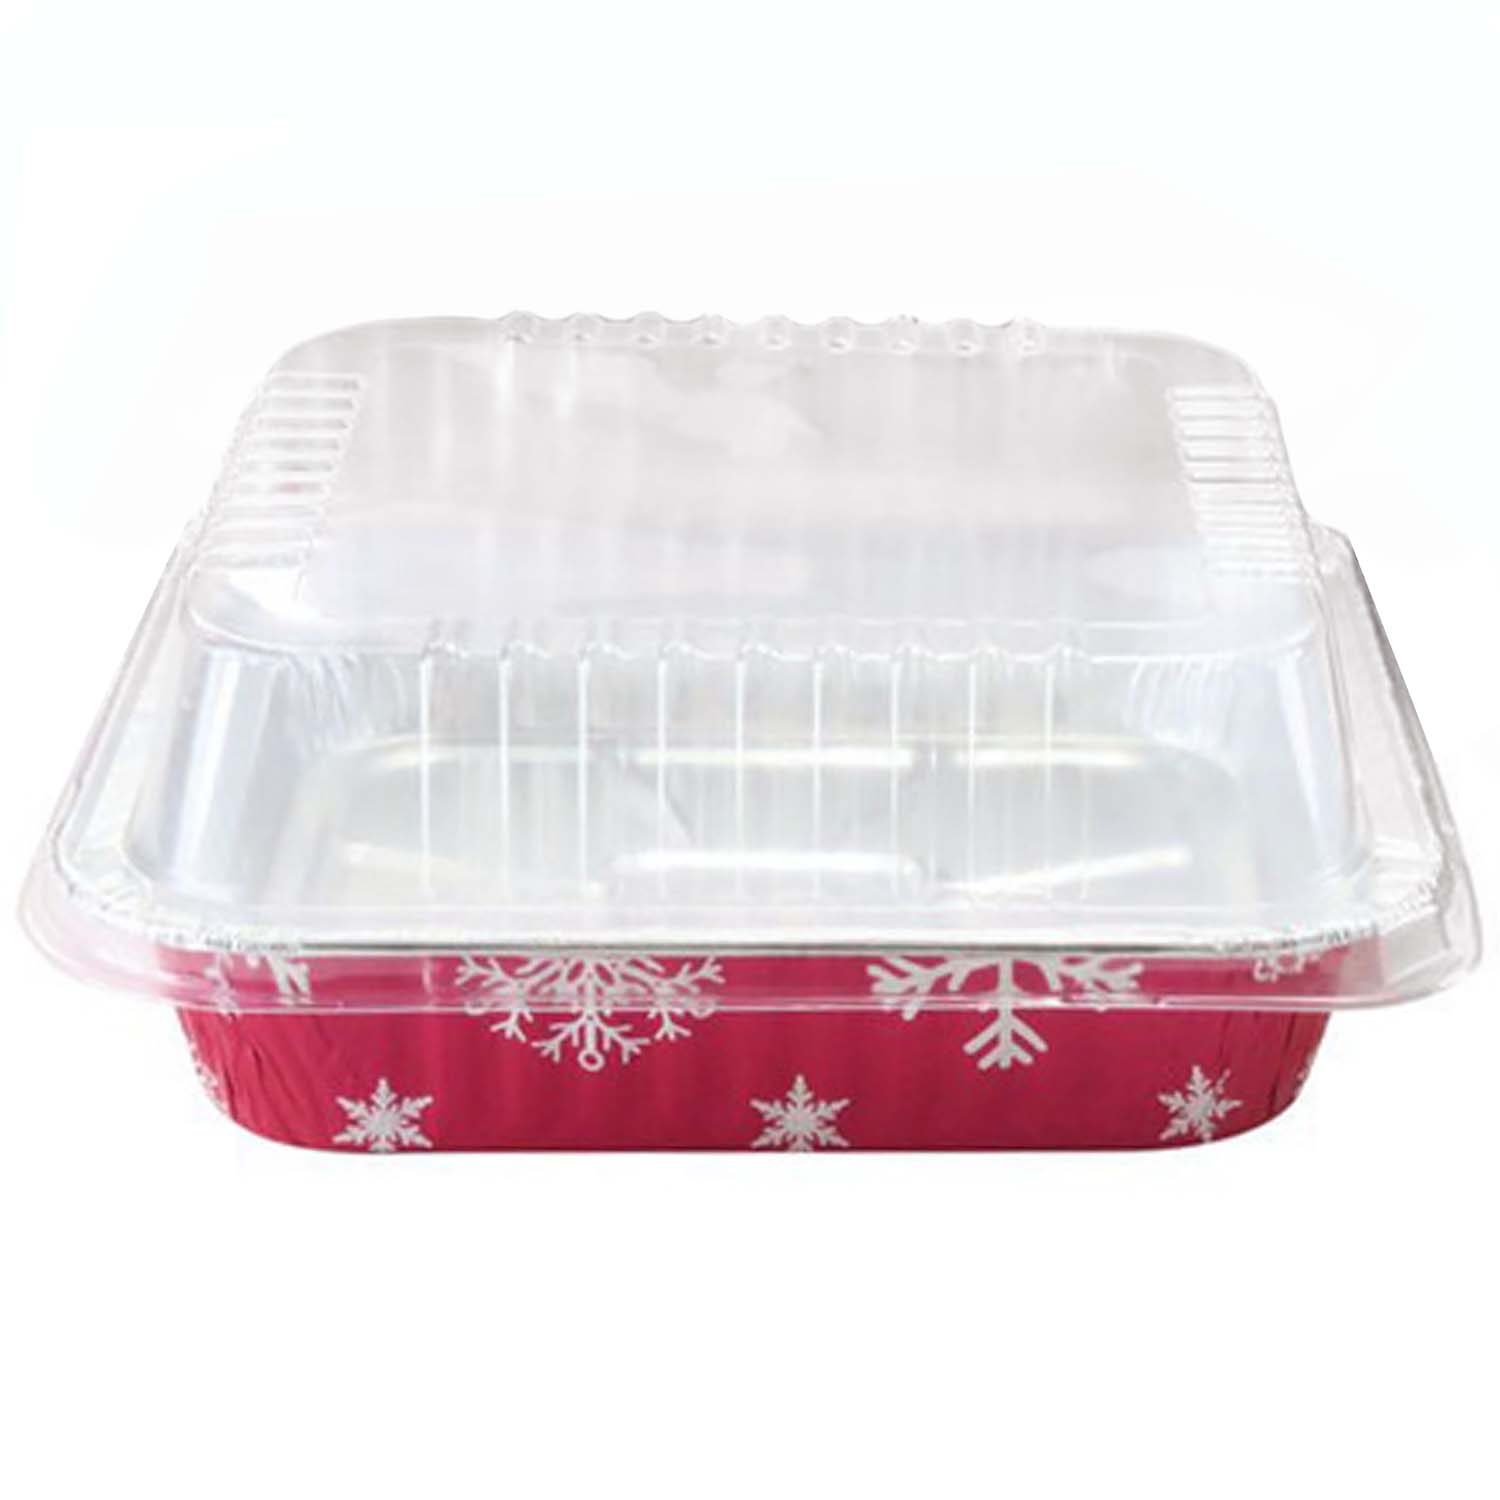 8" Square Snowflake Foil Pan with Dome Lid